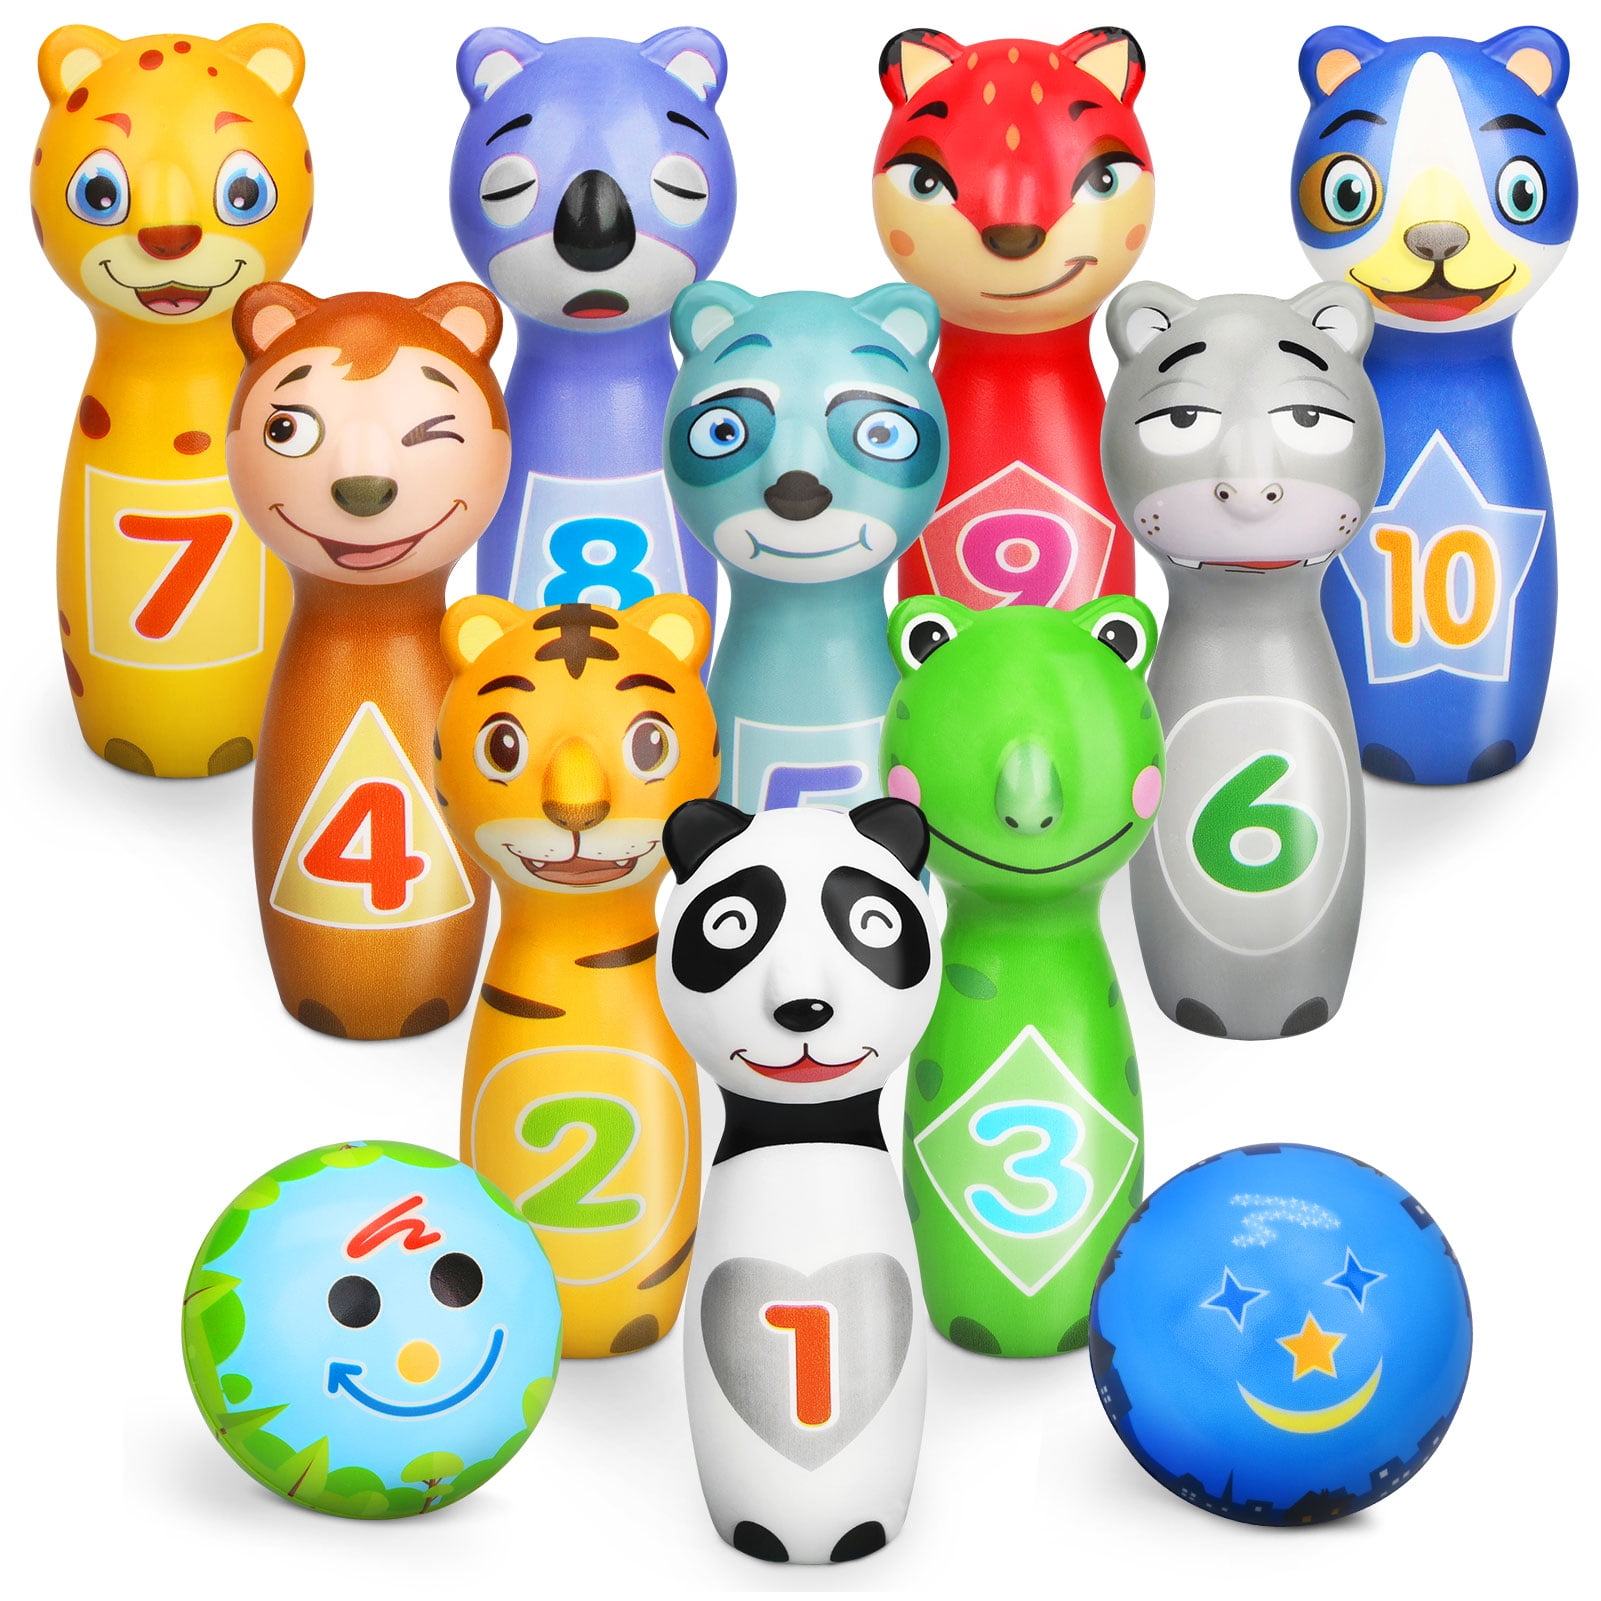 Sanlebi Kids Bowling Set for Toddlers - Soft Foam 10 Pins and 2 Ball with  Cute Animals Bowling Toys for Boys Toddlers 